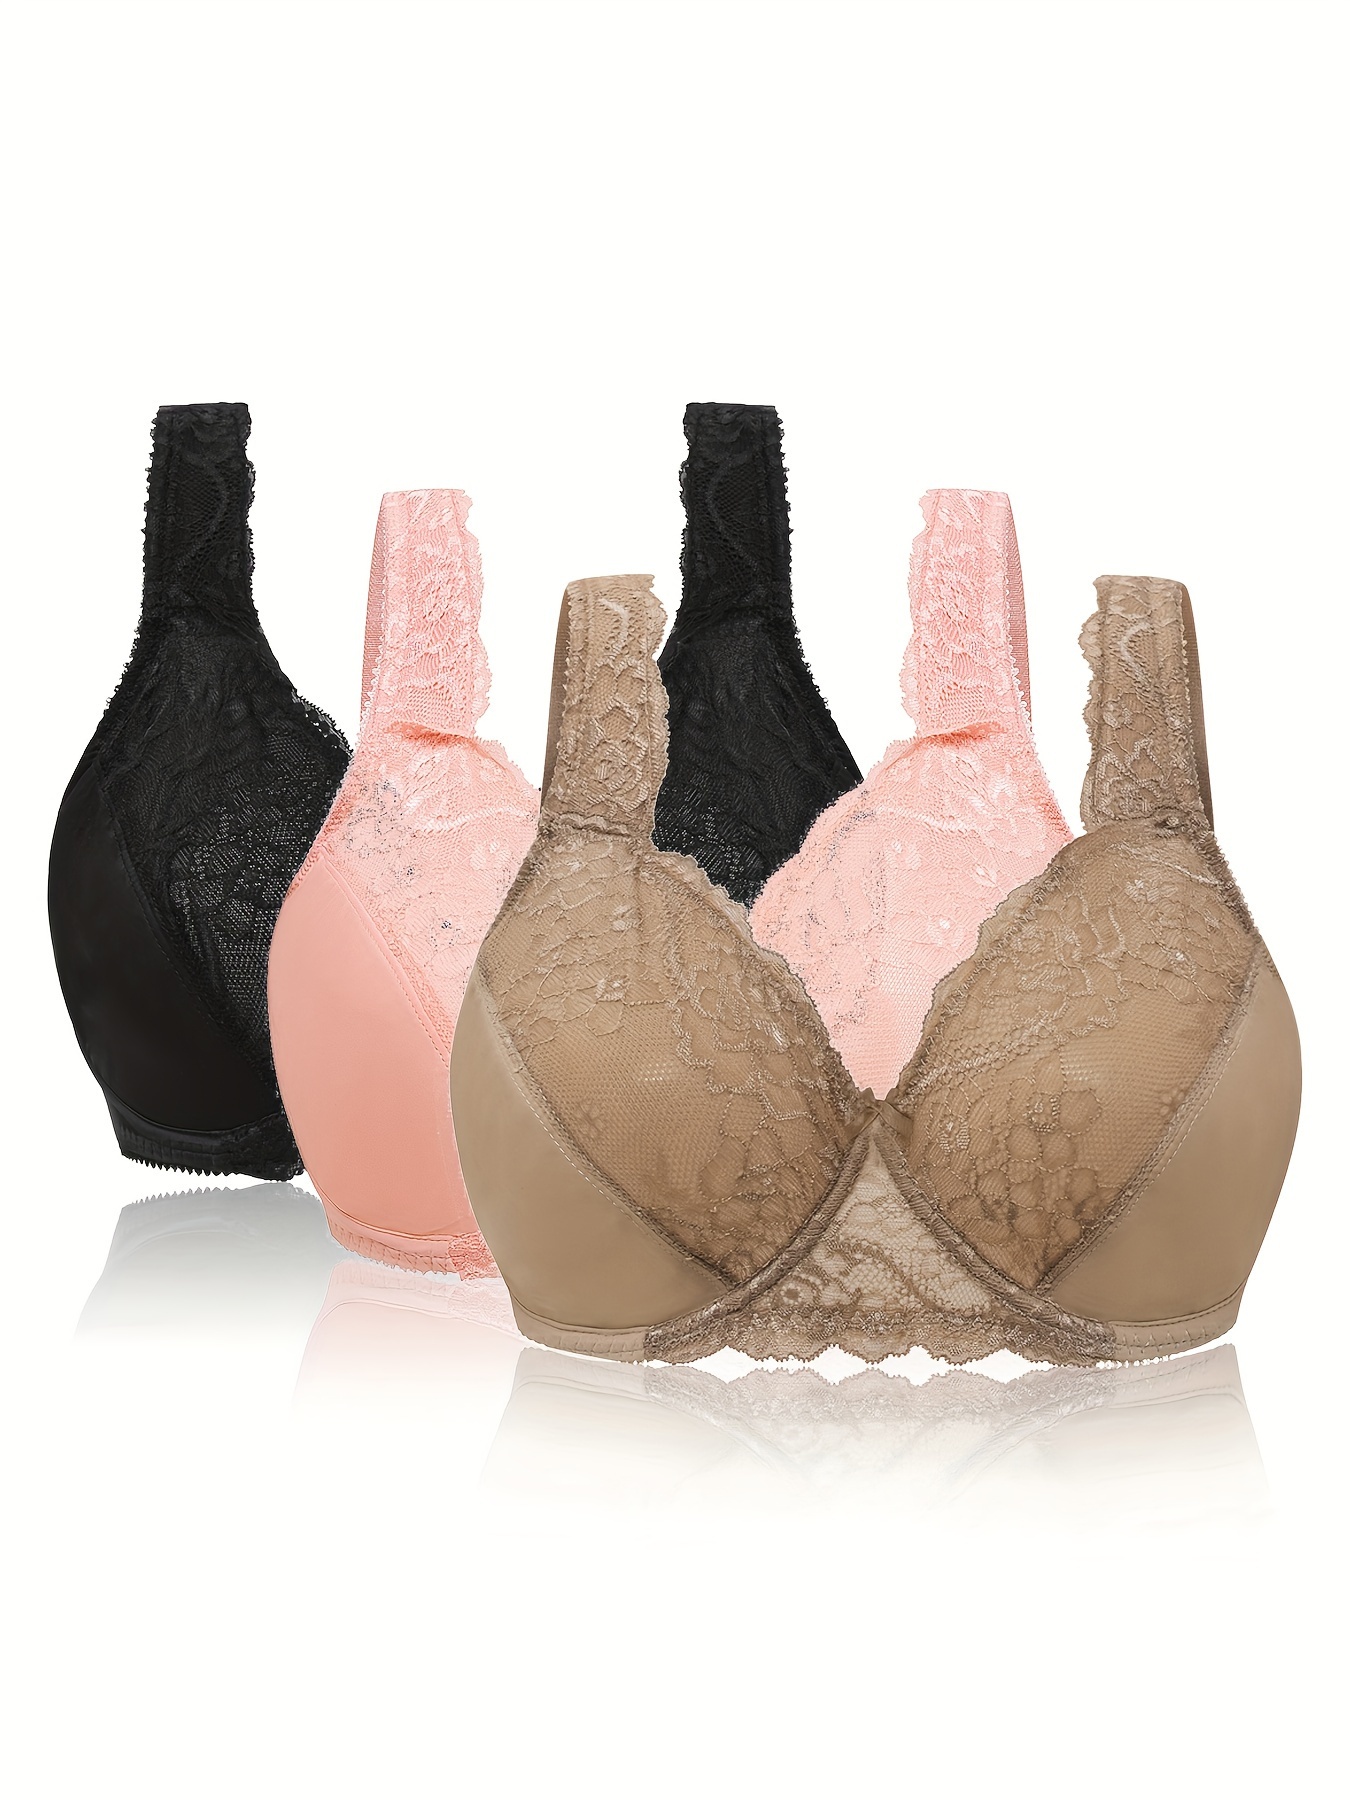 3pack Woman Padded Push-up Bras, Sexy Lace Cover Underwire